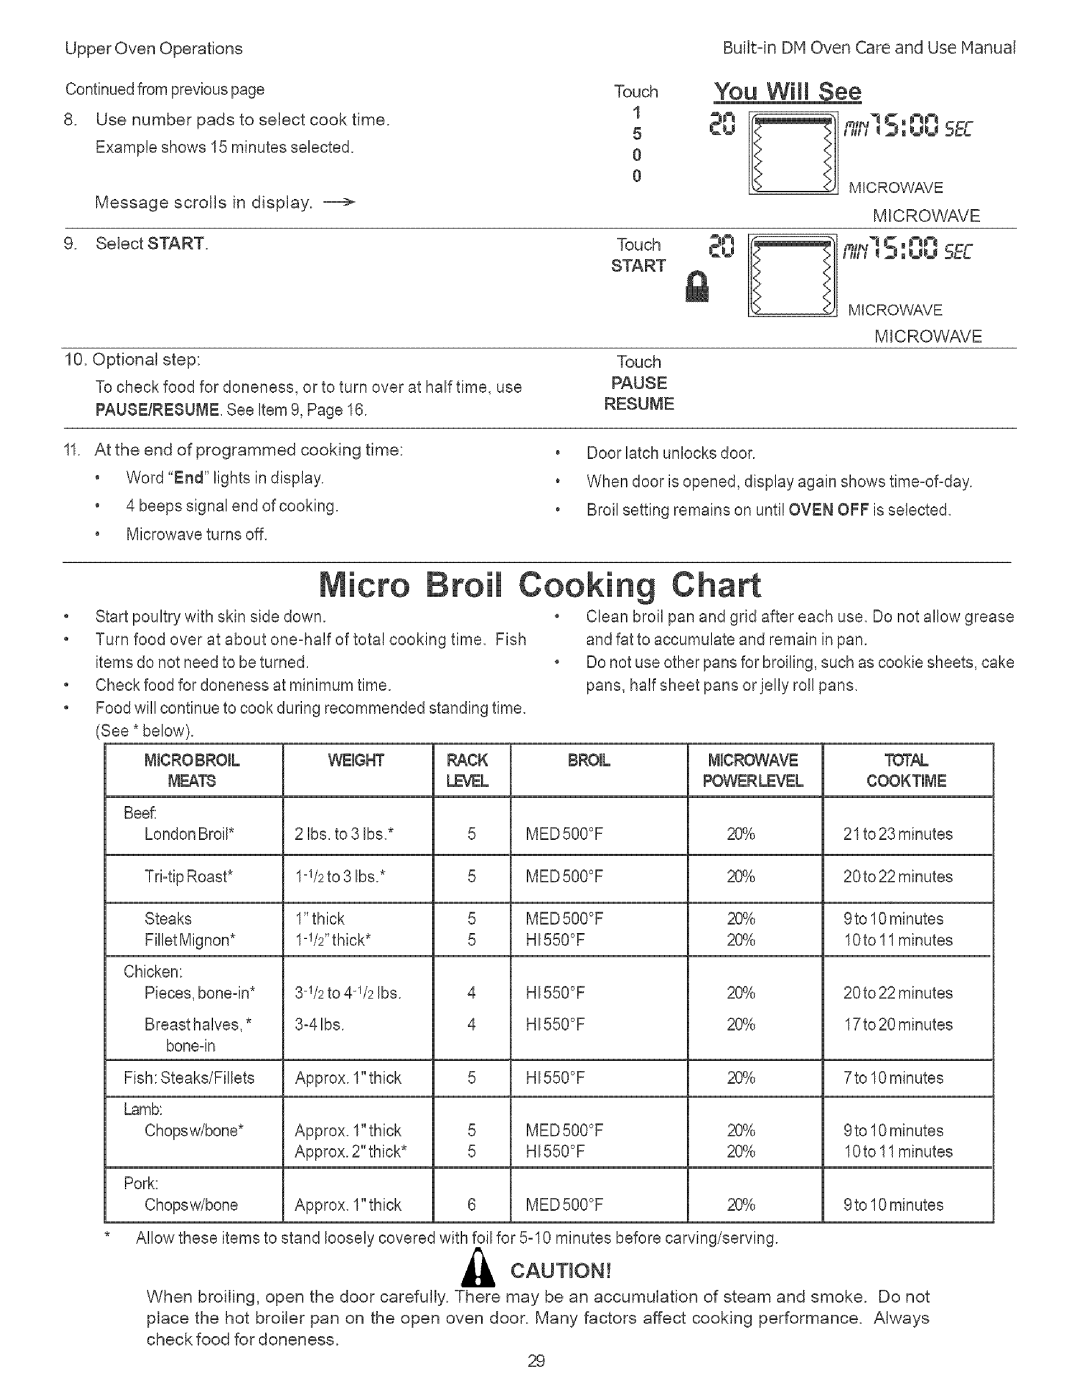 Thermador DM301 Micro, Broil, Cooking, Chart, UpperOvenOperations Continuedfrompreviouspage, Usenumberpadstoselectcooktime 